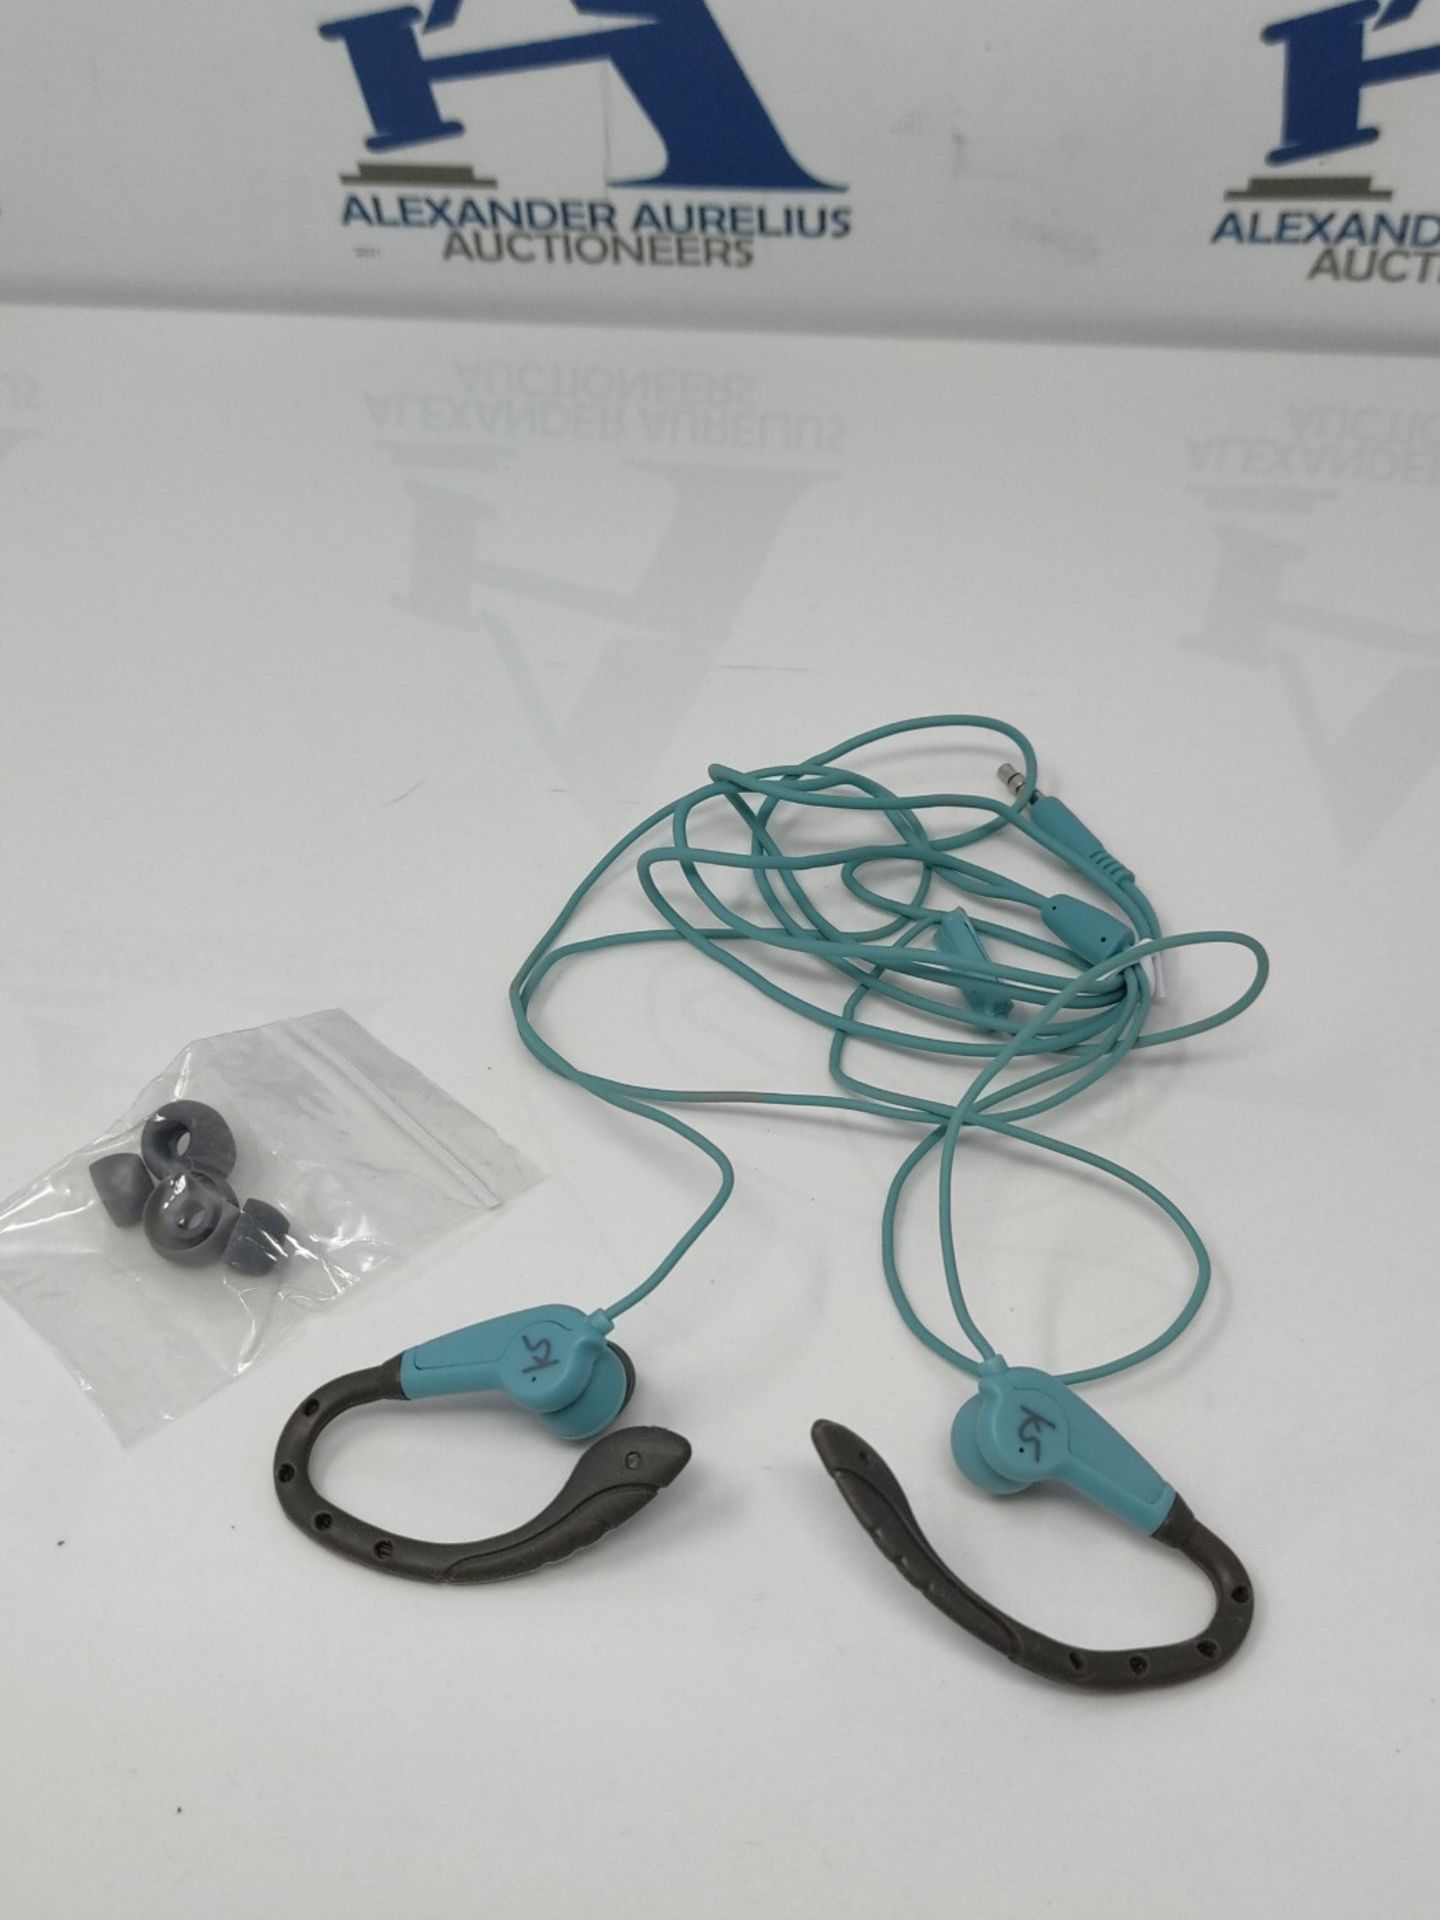 KITSOUND EXERT SPORT IN EAR WIRED TEAL